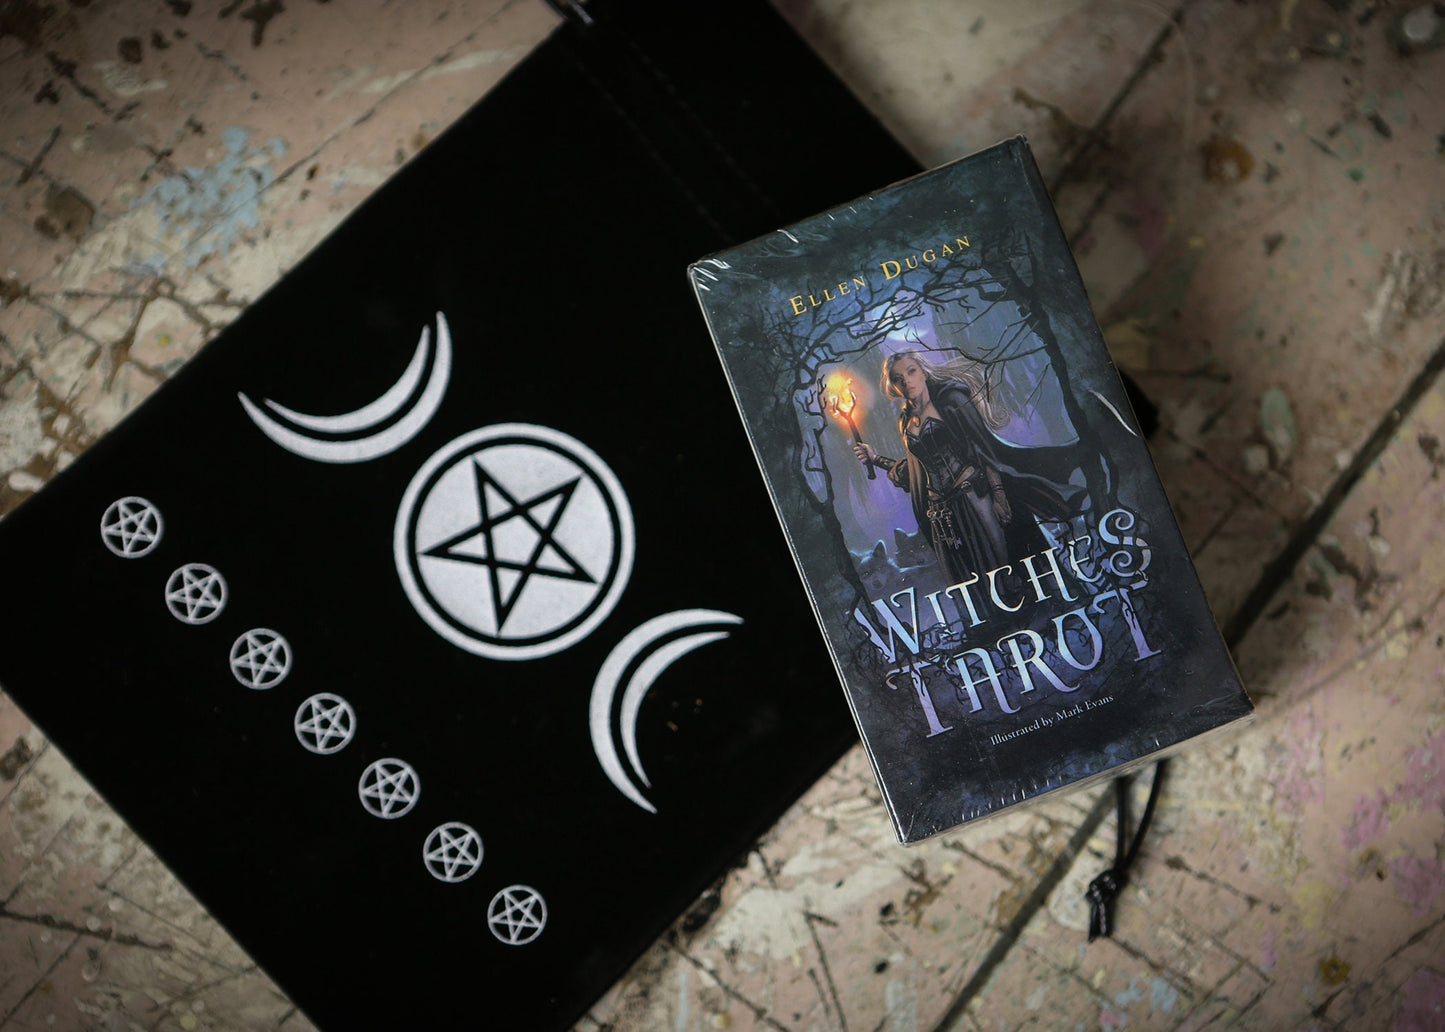 Tarot Cards Deck - Witches